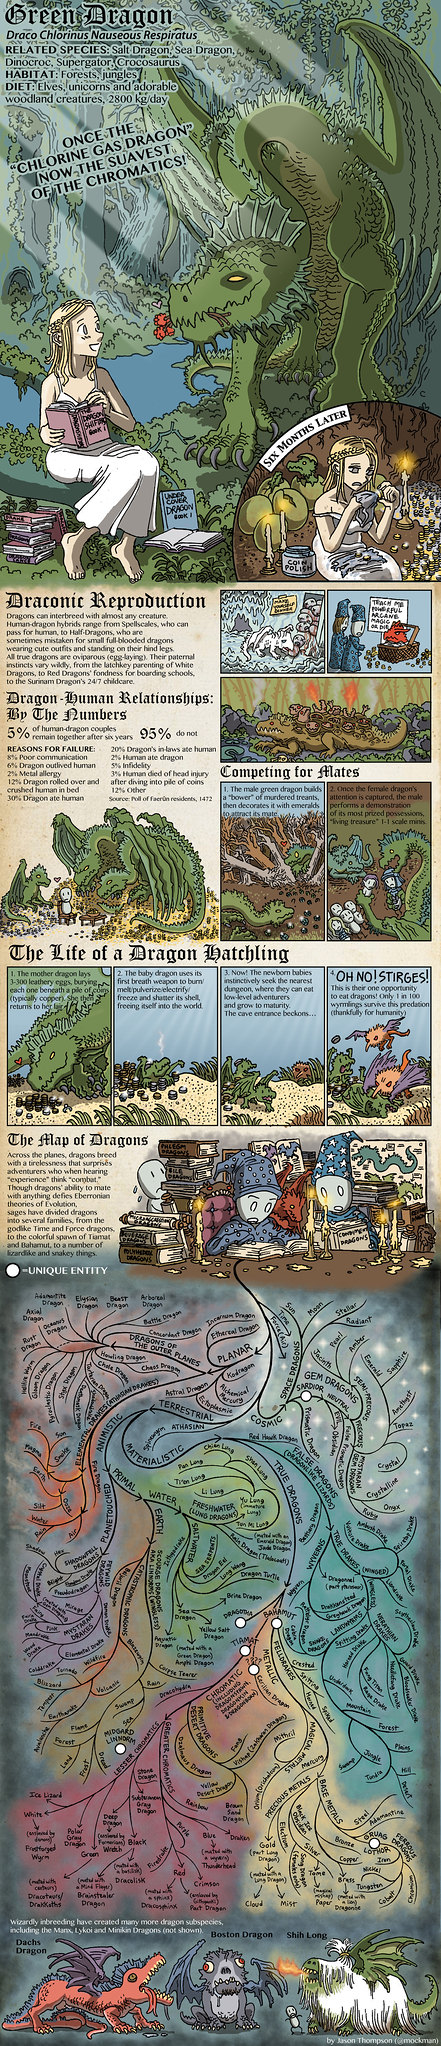 The Dragons of Dungeons & Dragons by Jason Thompson - Green Dragon